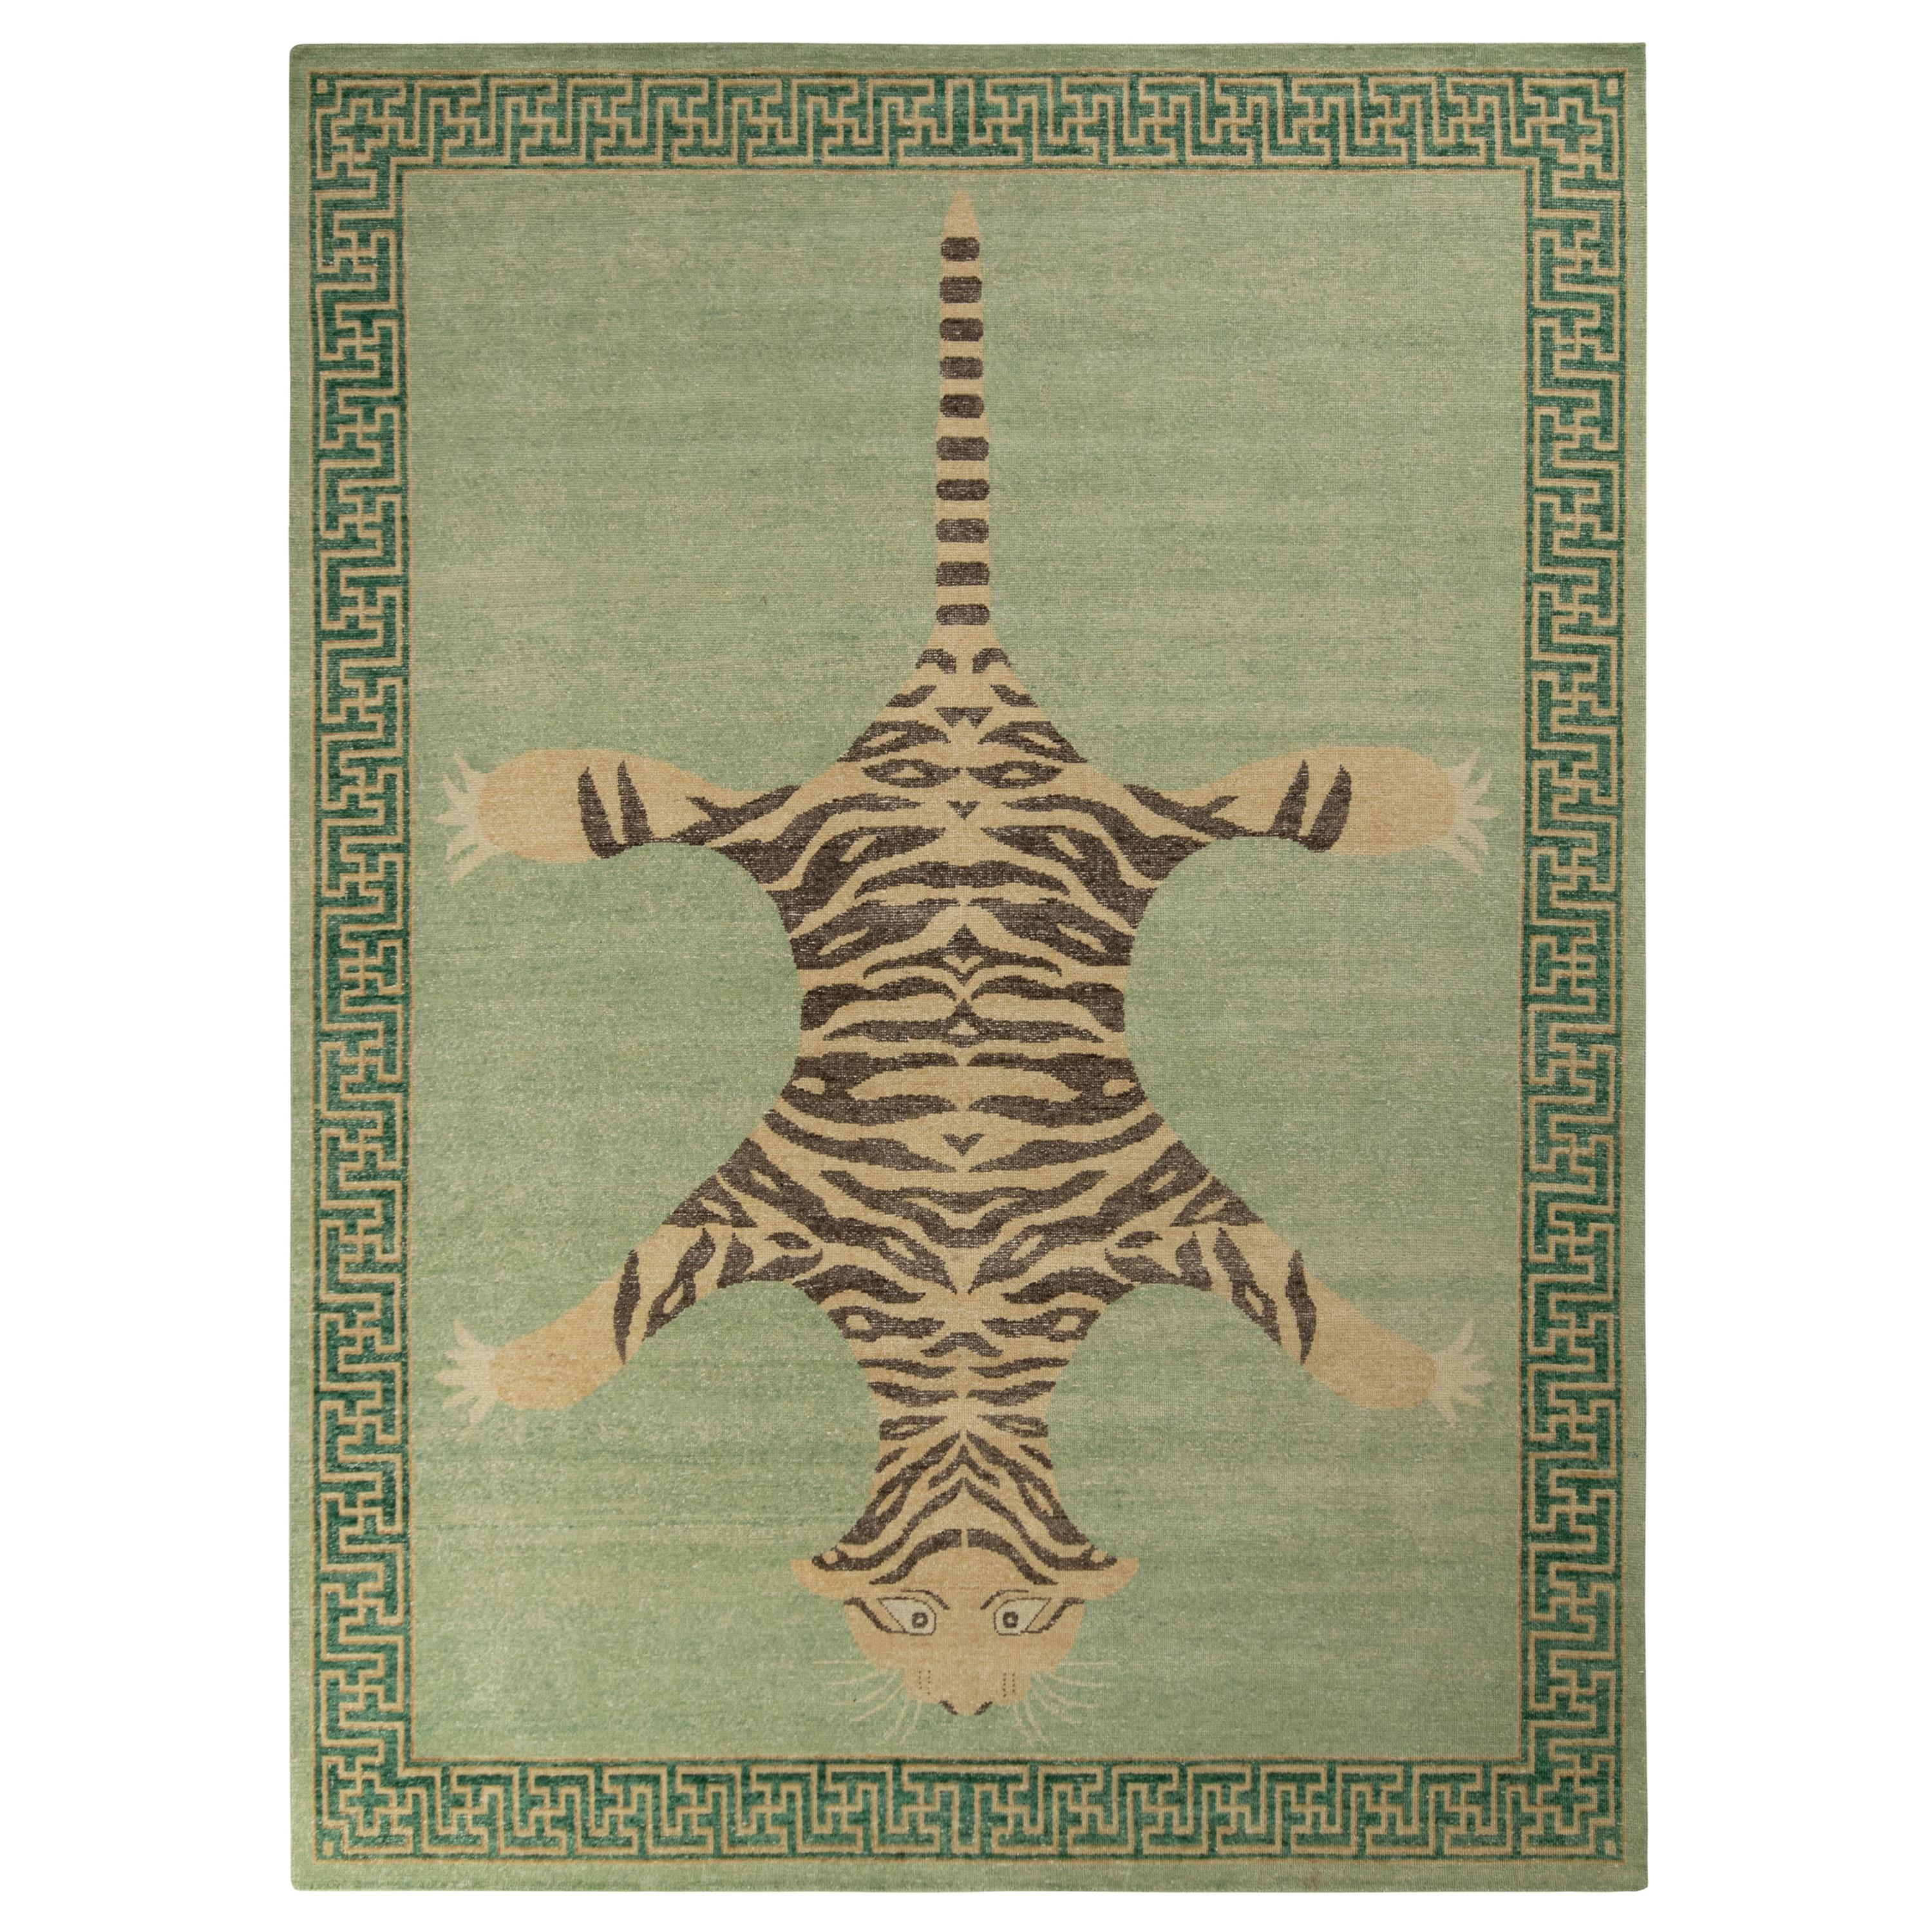 Rug & Kilim’s Distressed Style Tiger Rug in Green, Pictorial Pattern